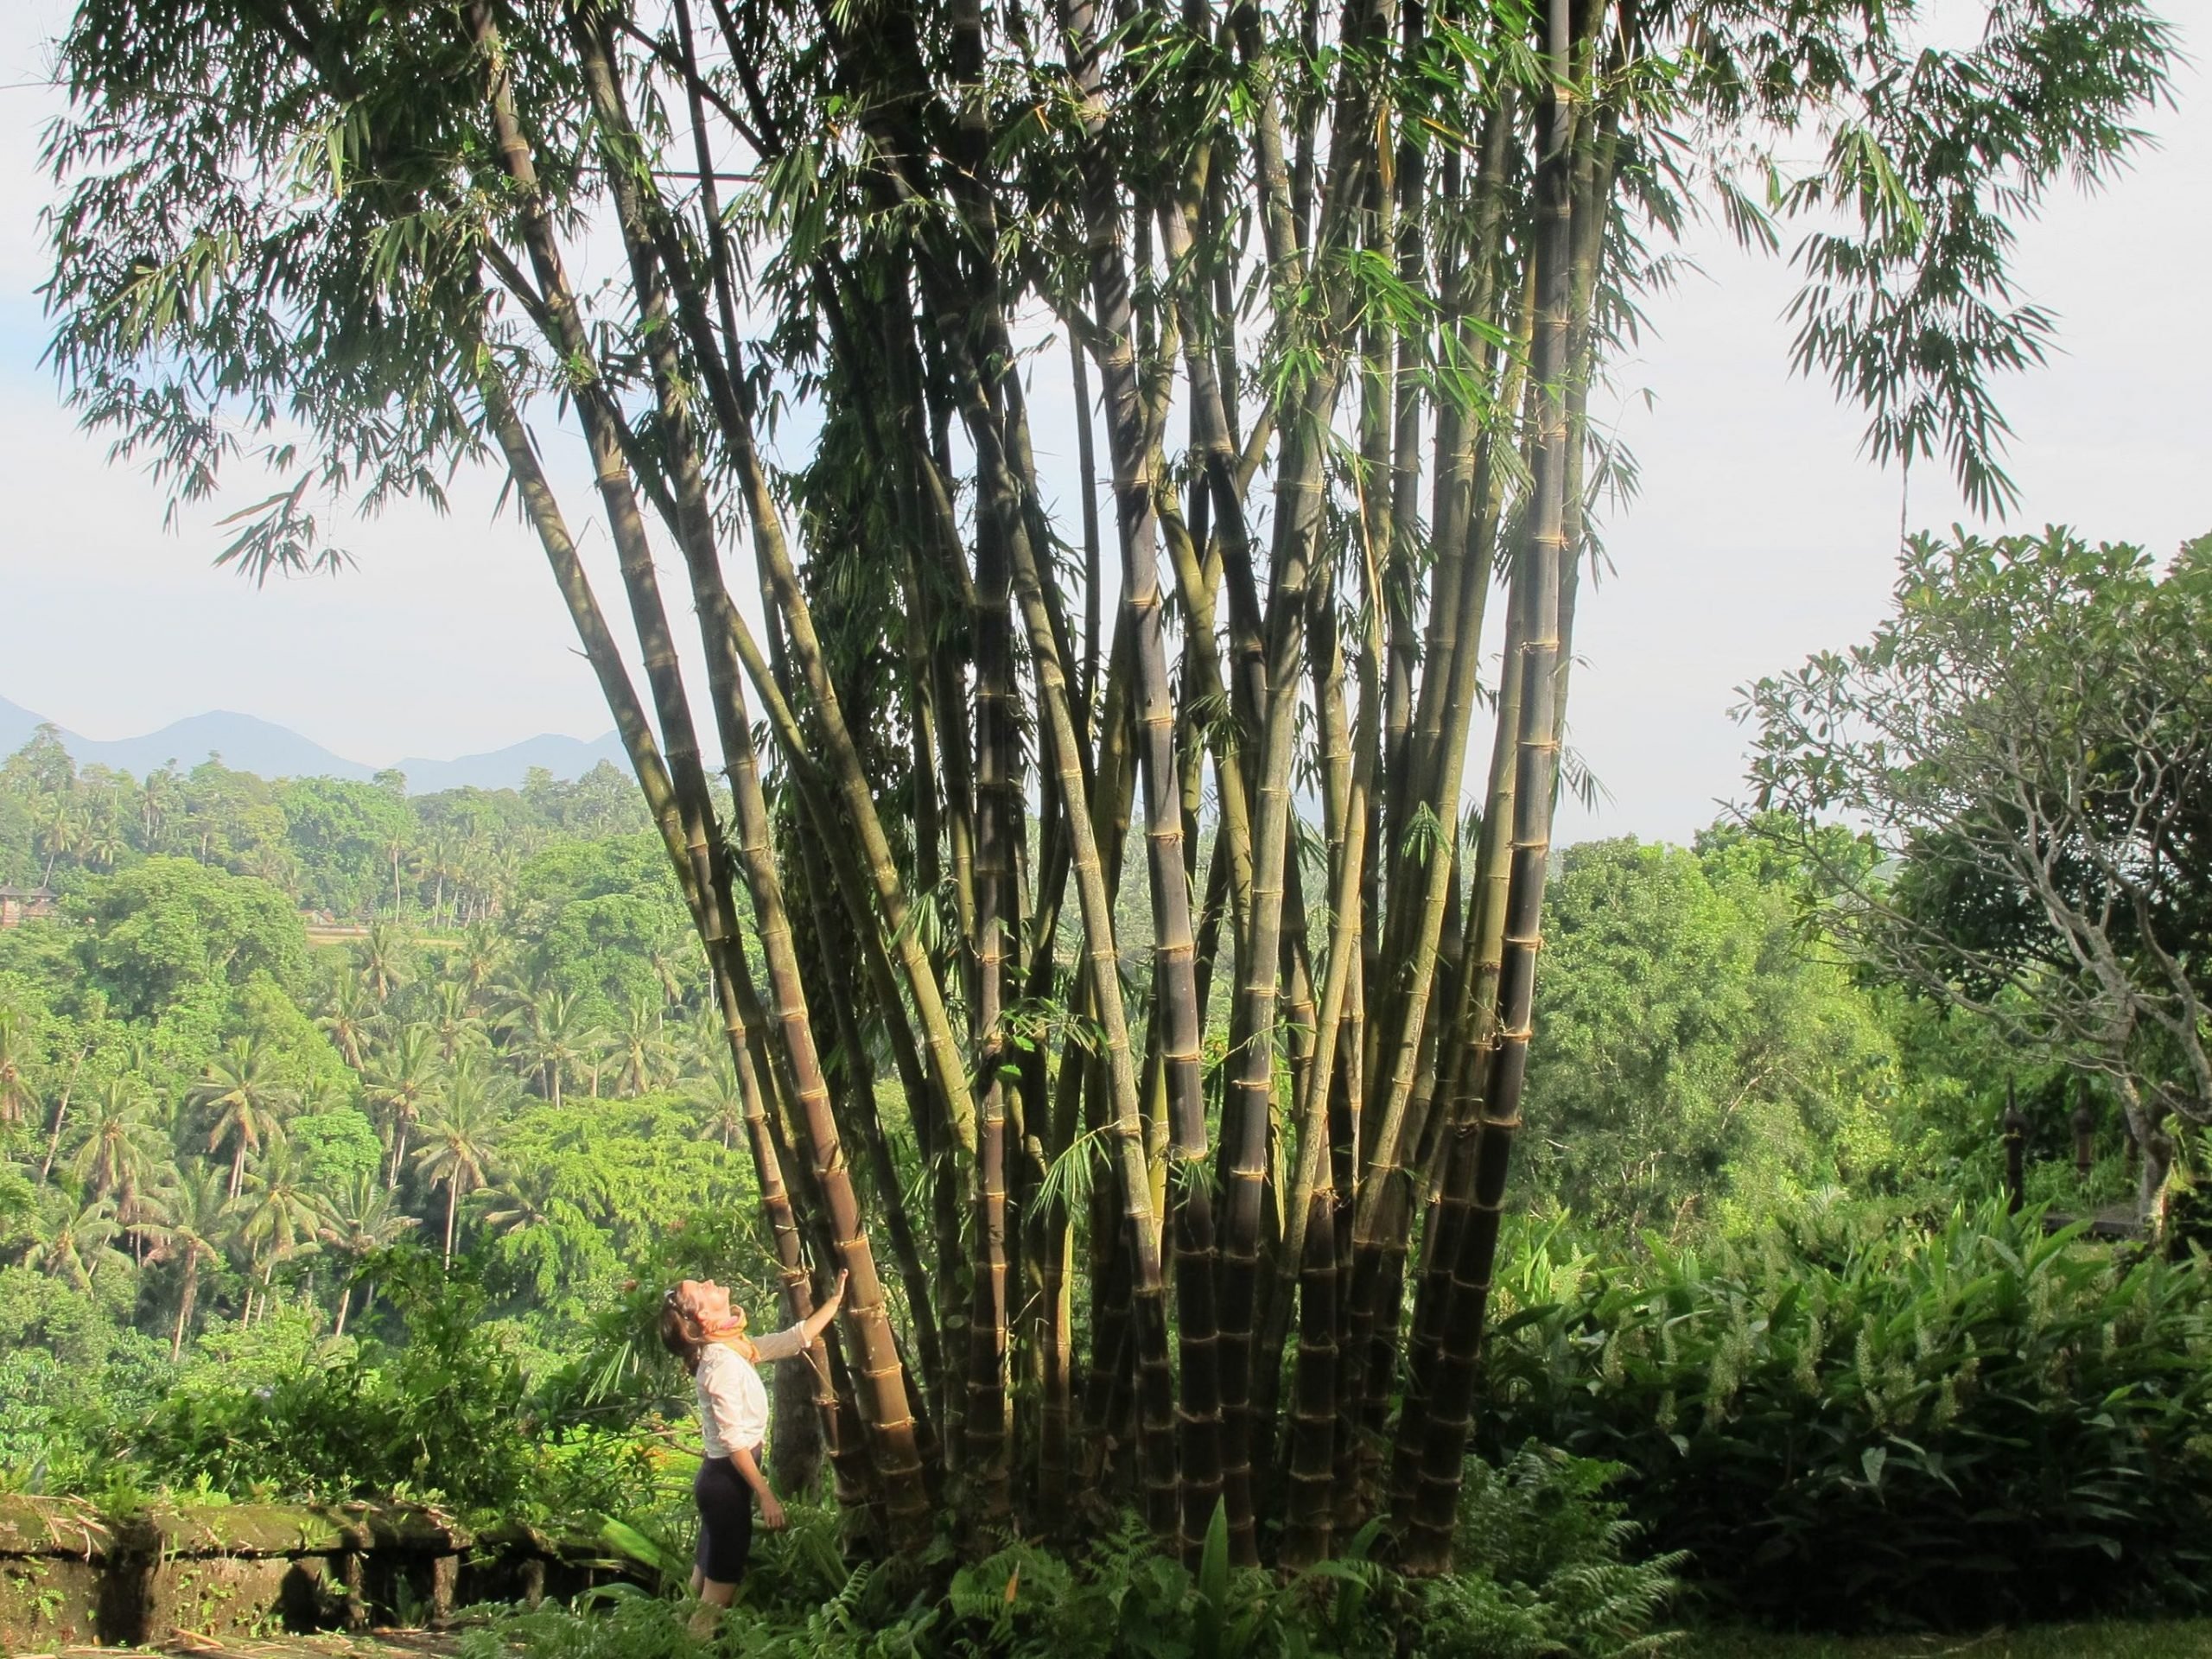 A woman standing in a bamboo grove